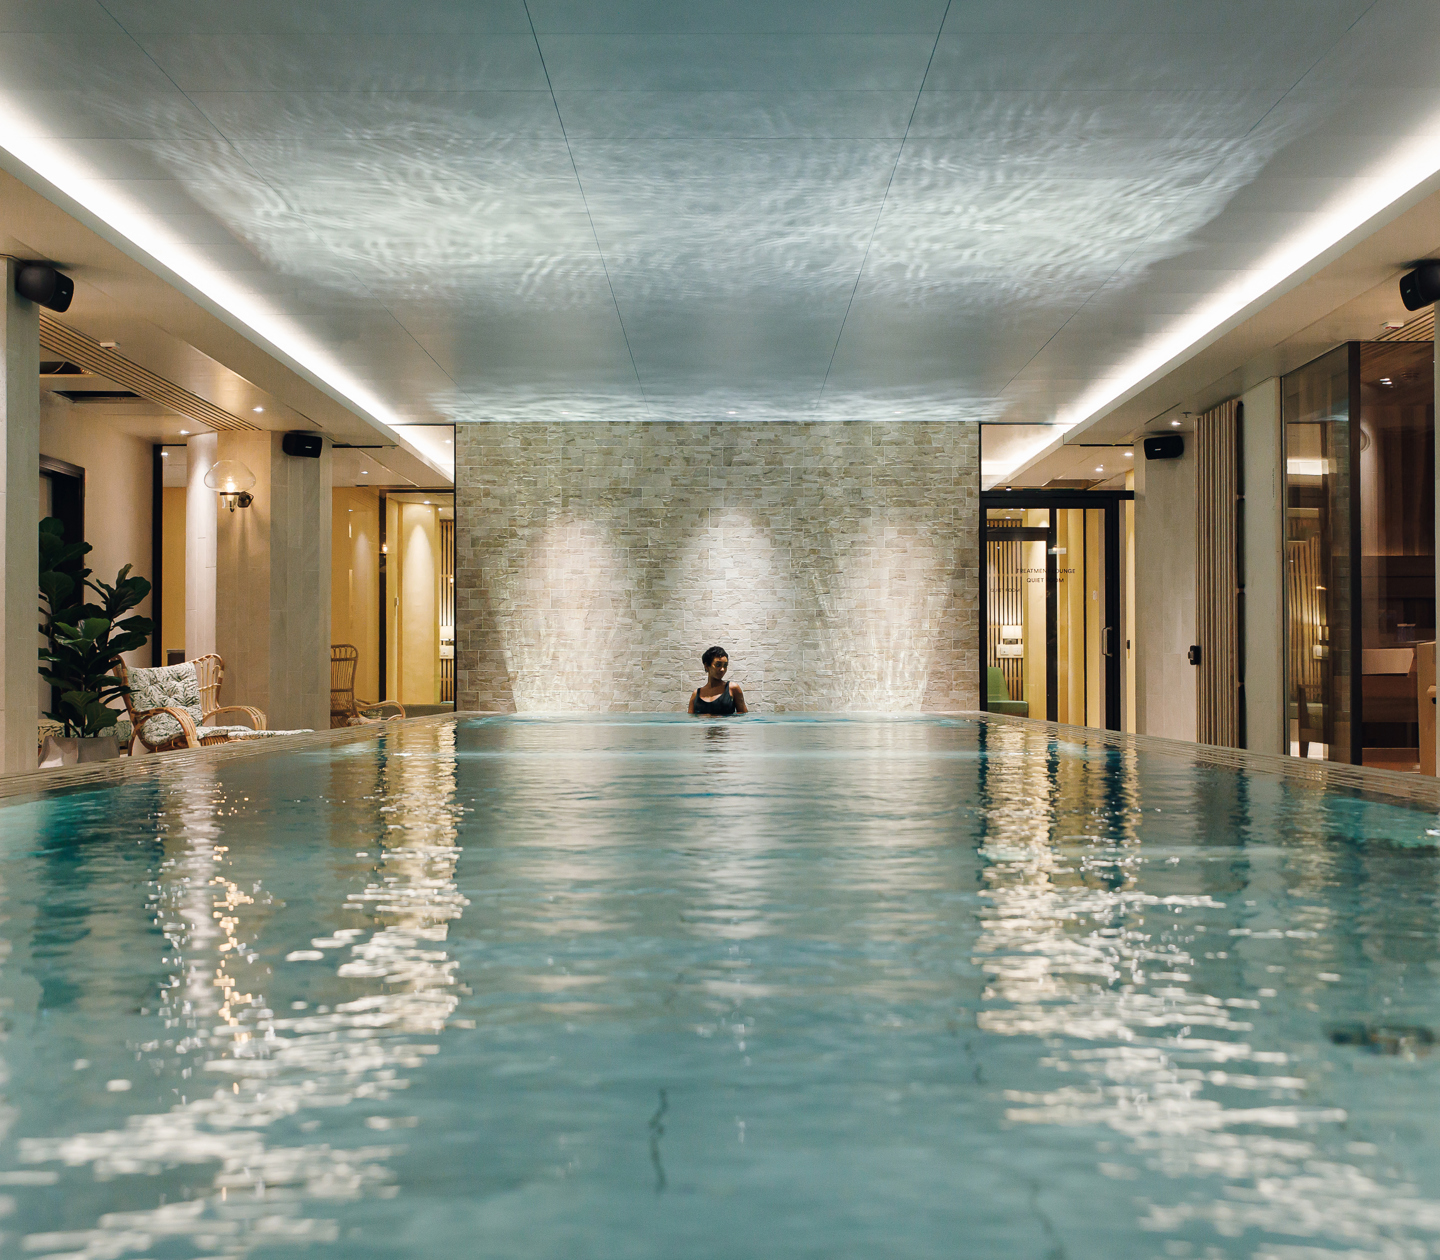 Spa environment with pool, sunbeds and woman in the water